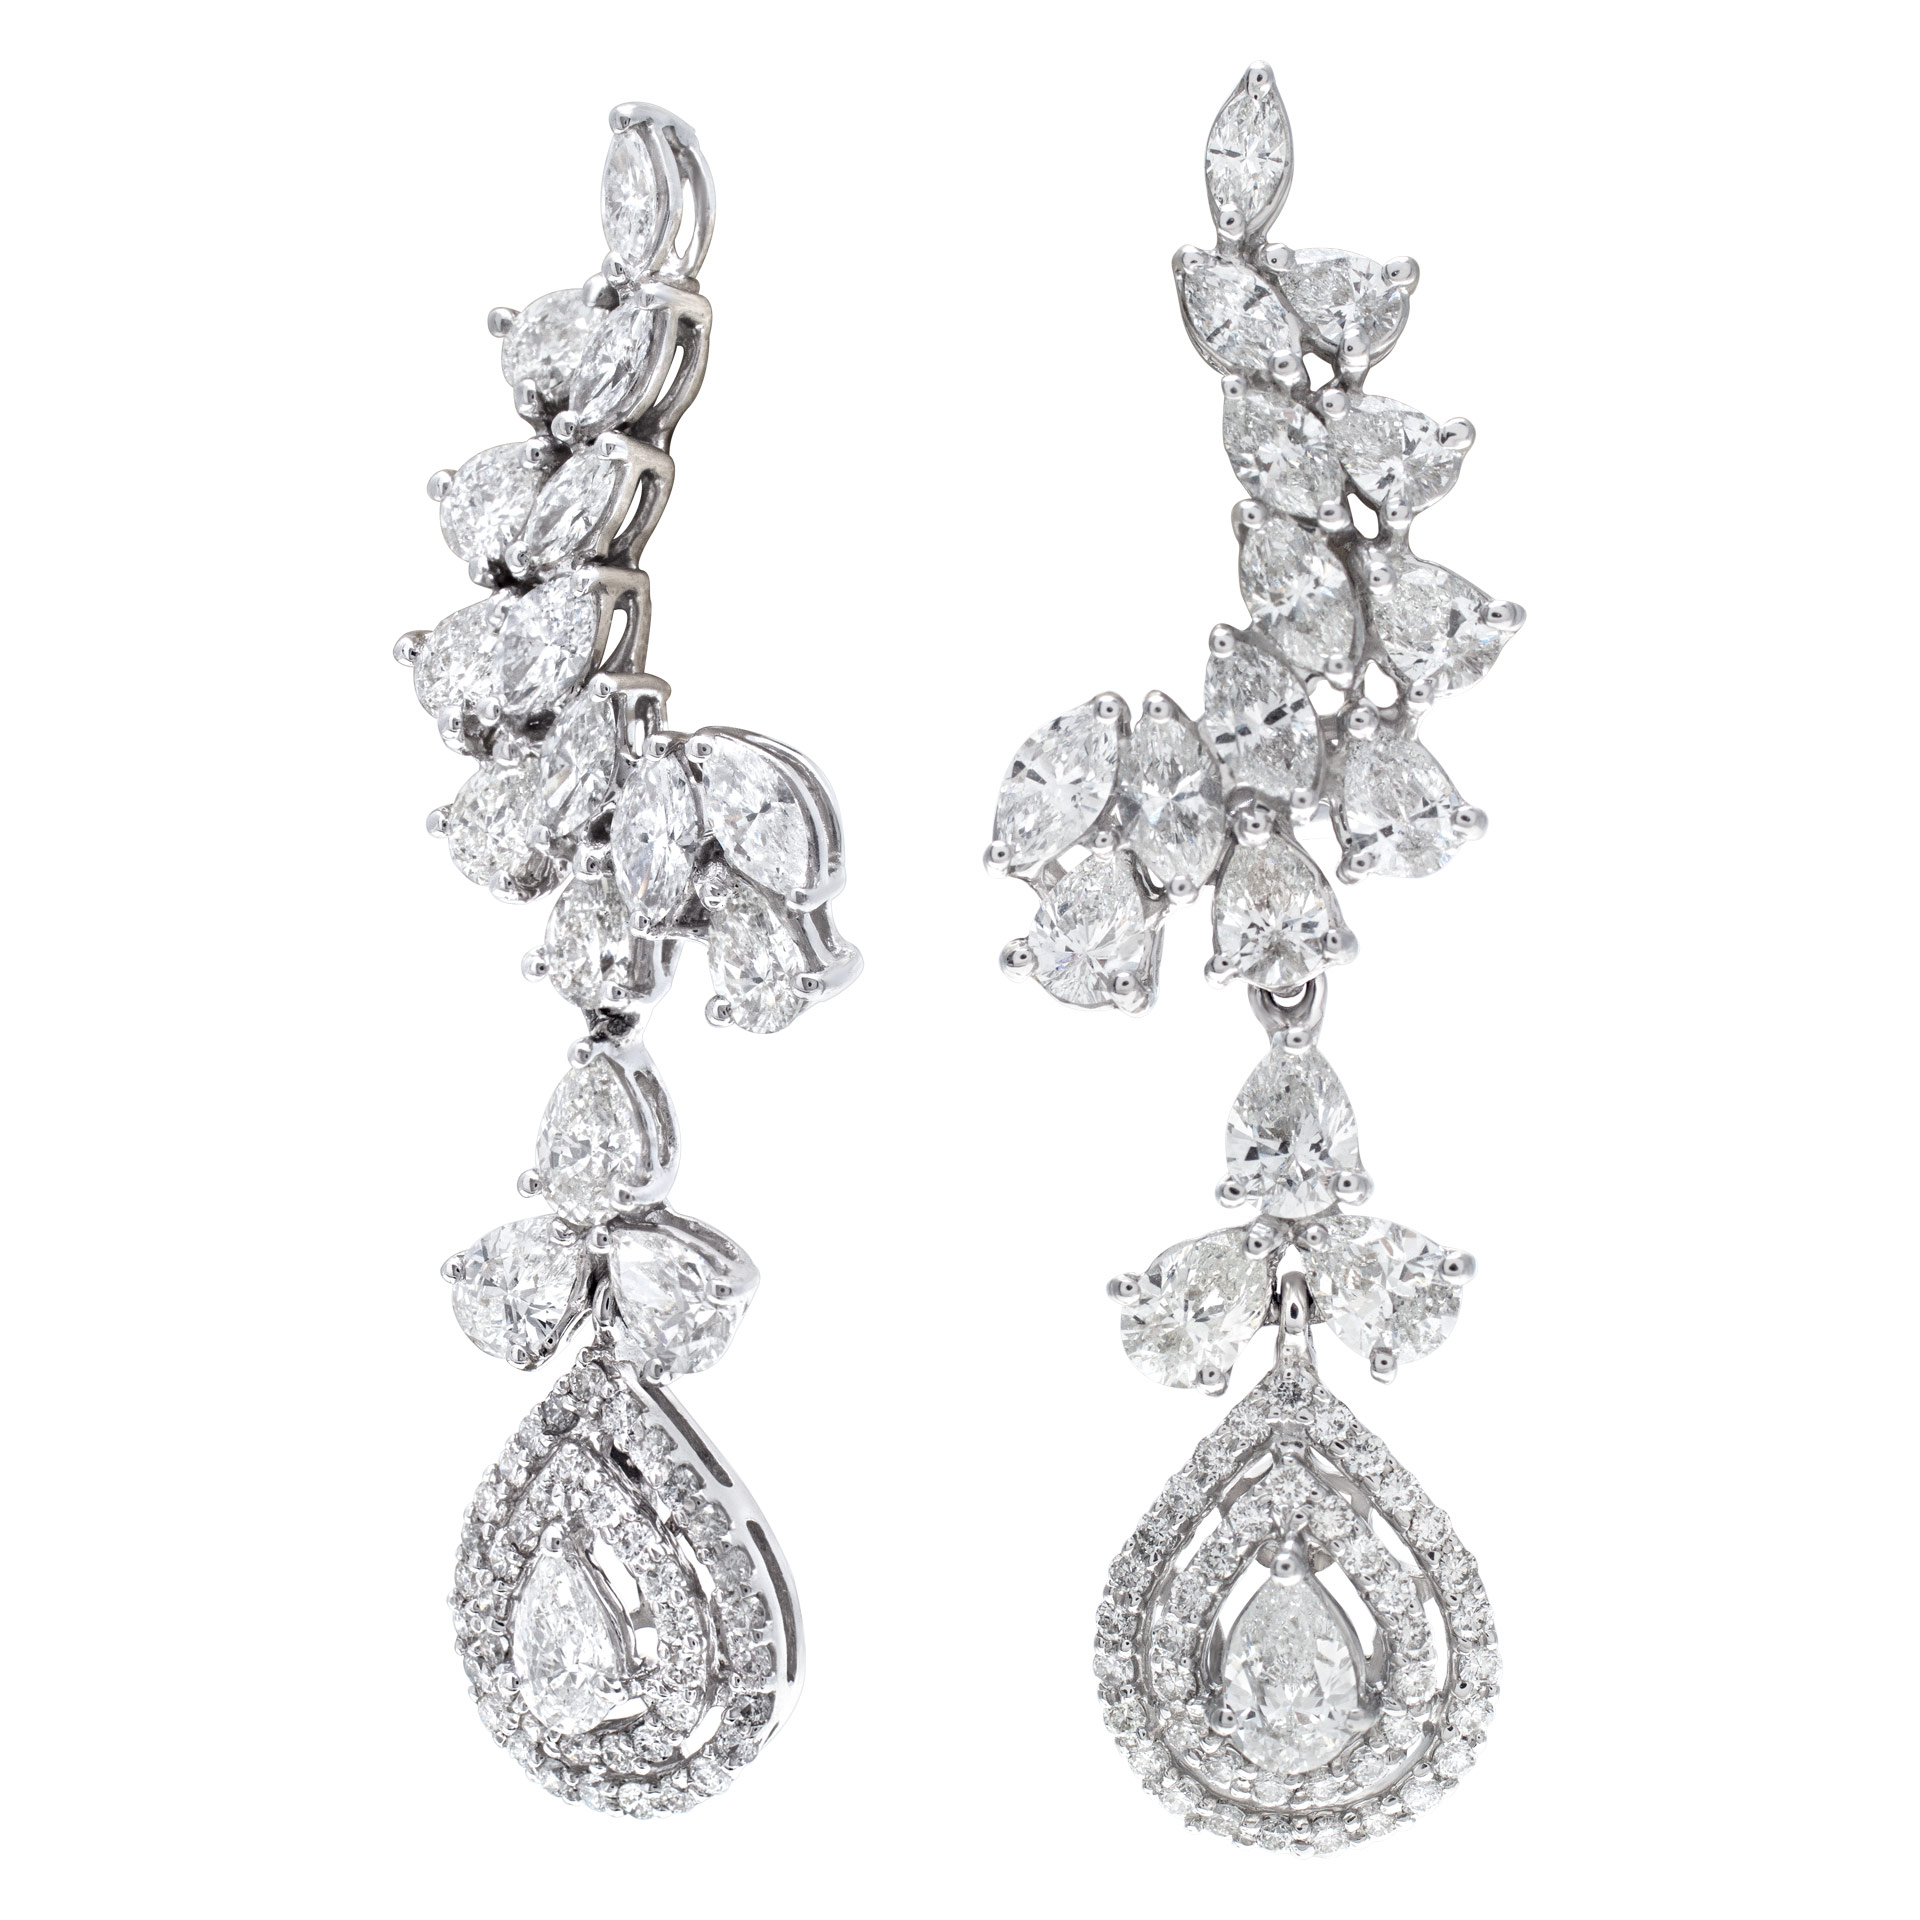 Brilliant marquise, pear, round cut diamond dangling earrings set in 18k white gold. Total diamonds approx. weight: 5.00 carats image 2